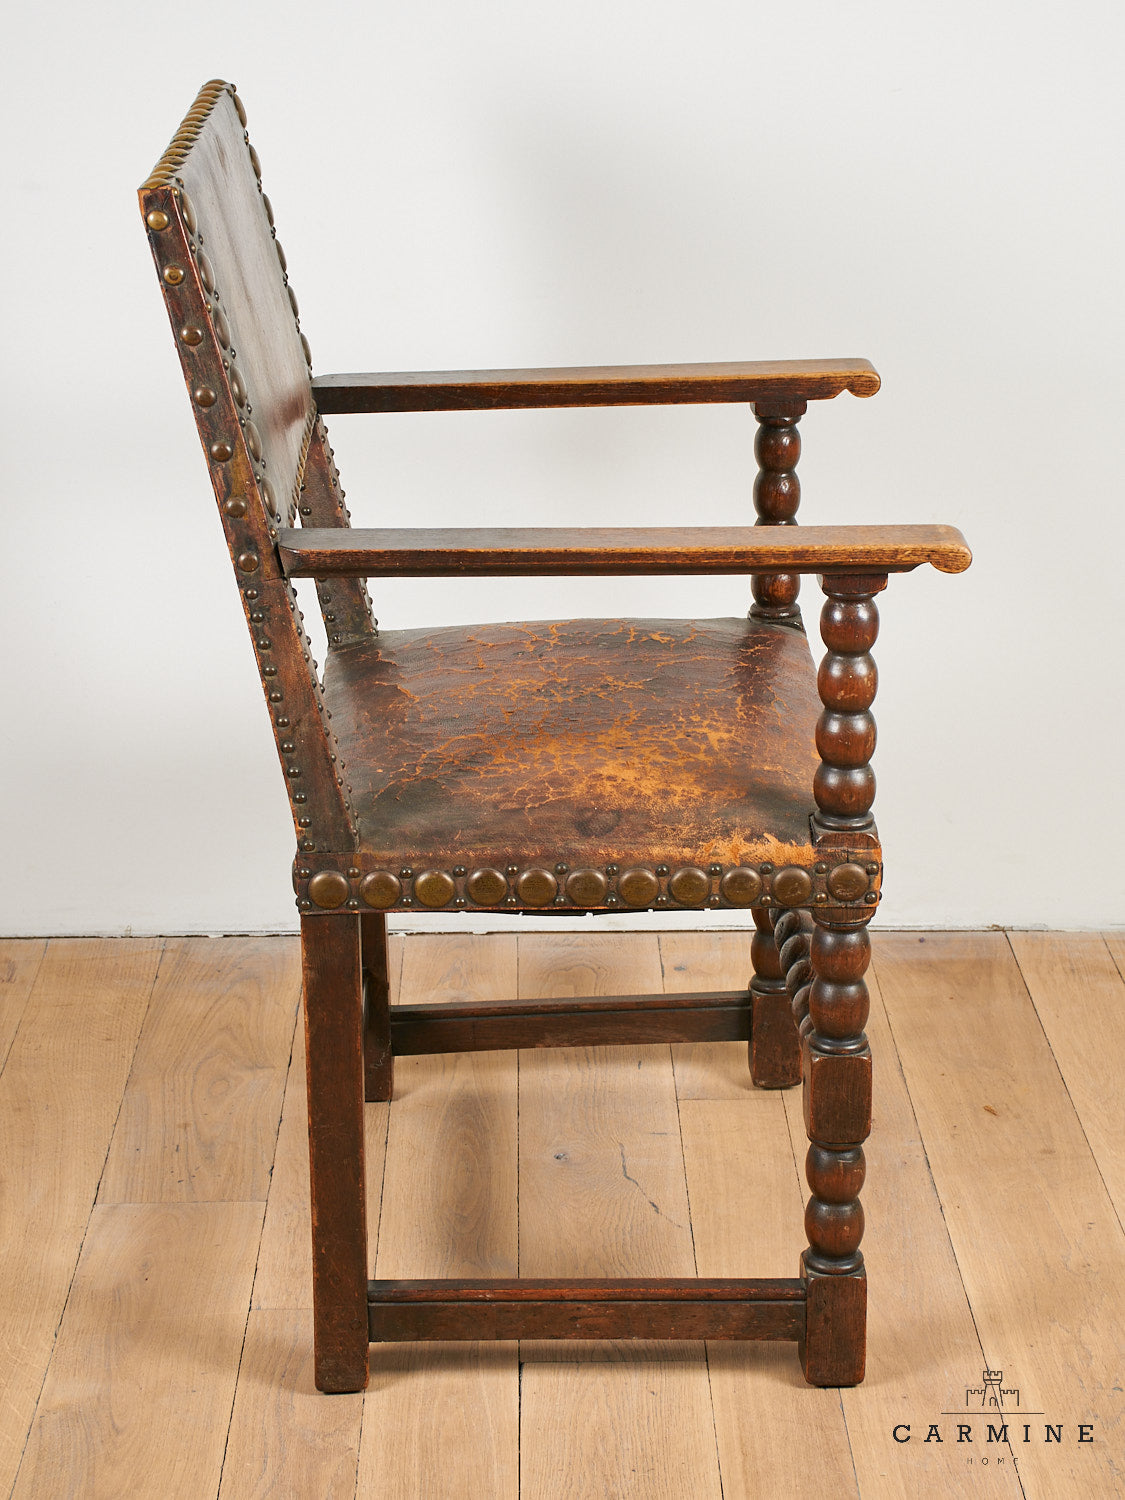 3 leather armchairs, 17th/18th century century